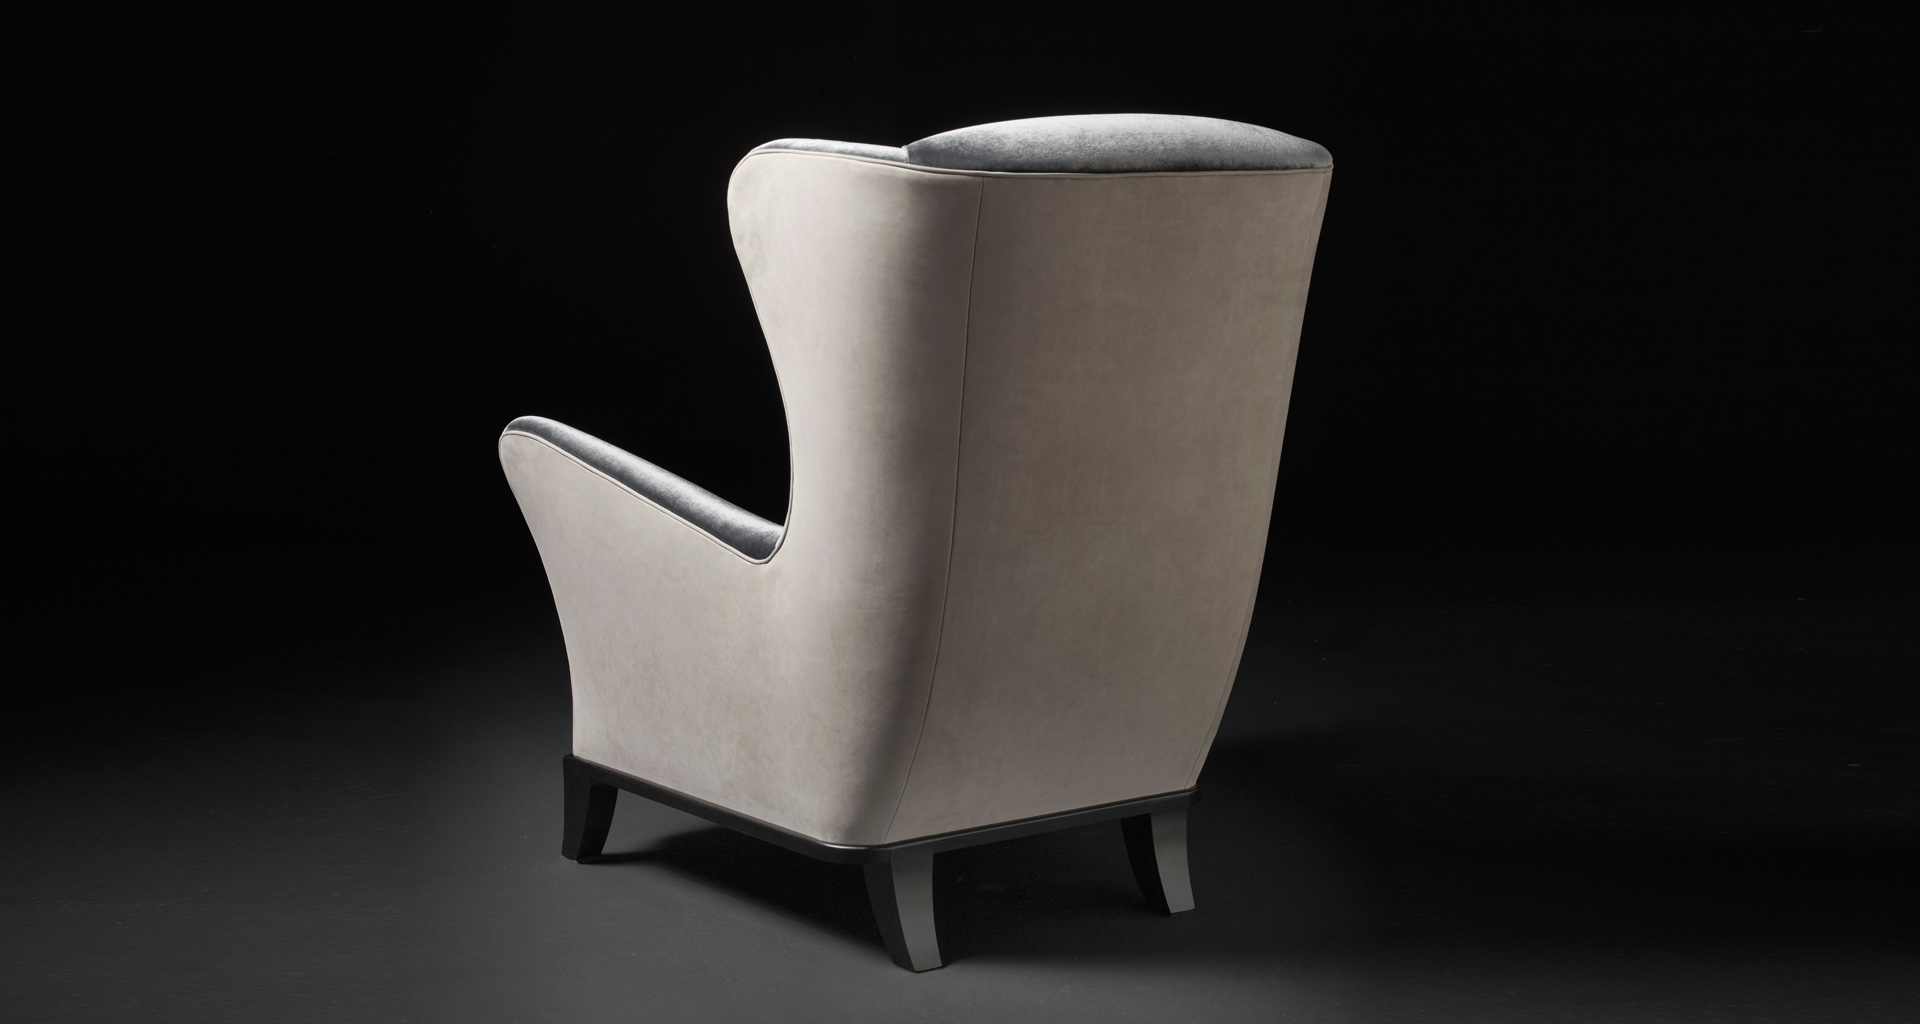 Bluette is a wooden armchair covered in fabric or leather, from Promemoria's Night Tales collection | Promemoria